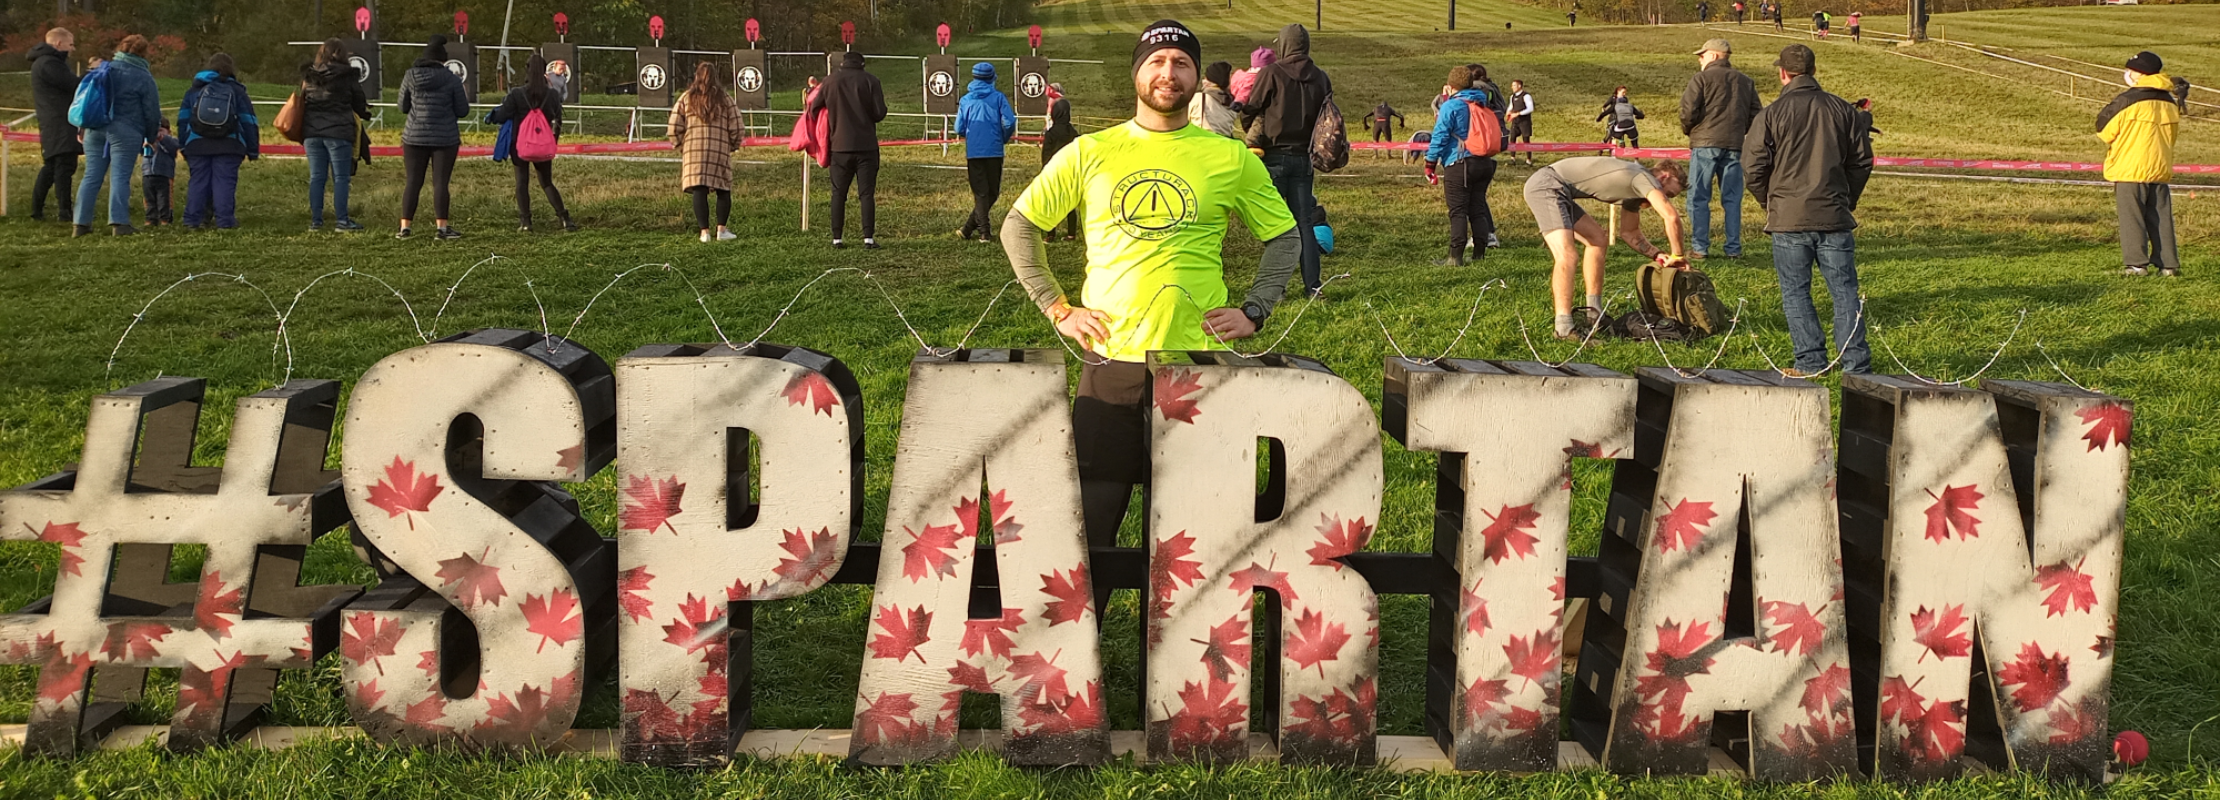 Structurack at the Spartan Beast 2021